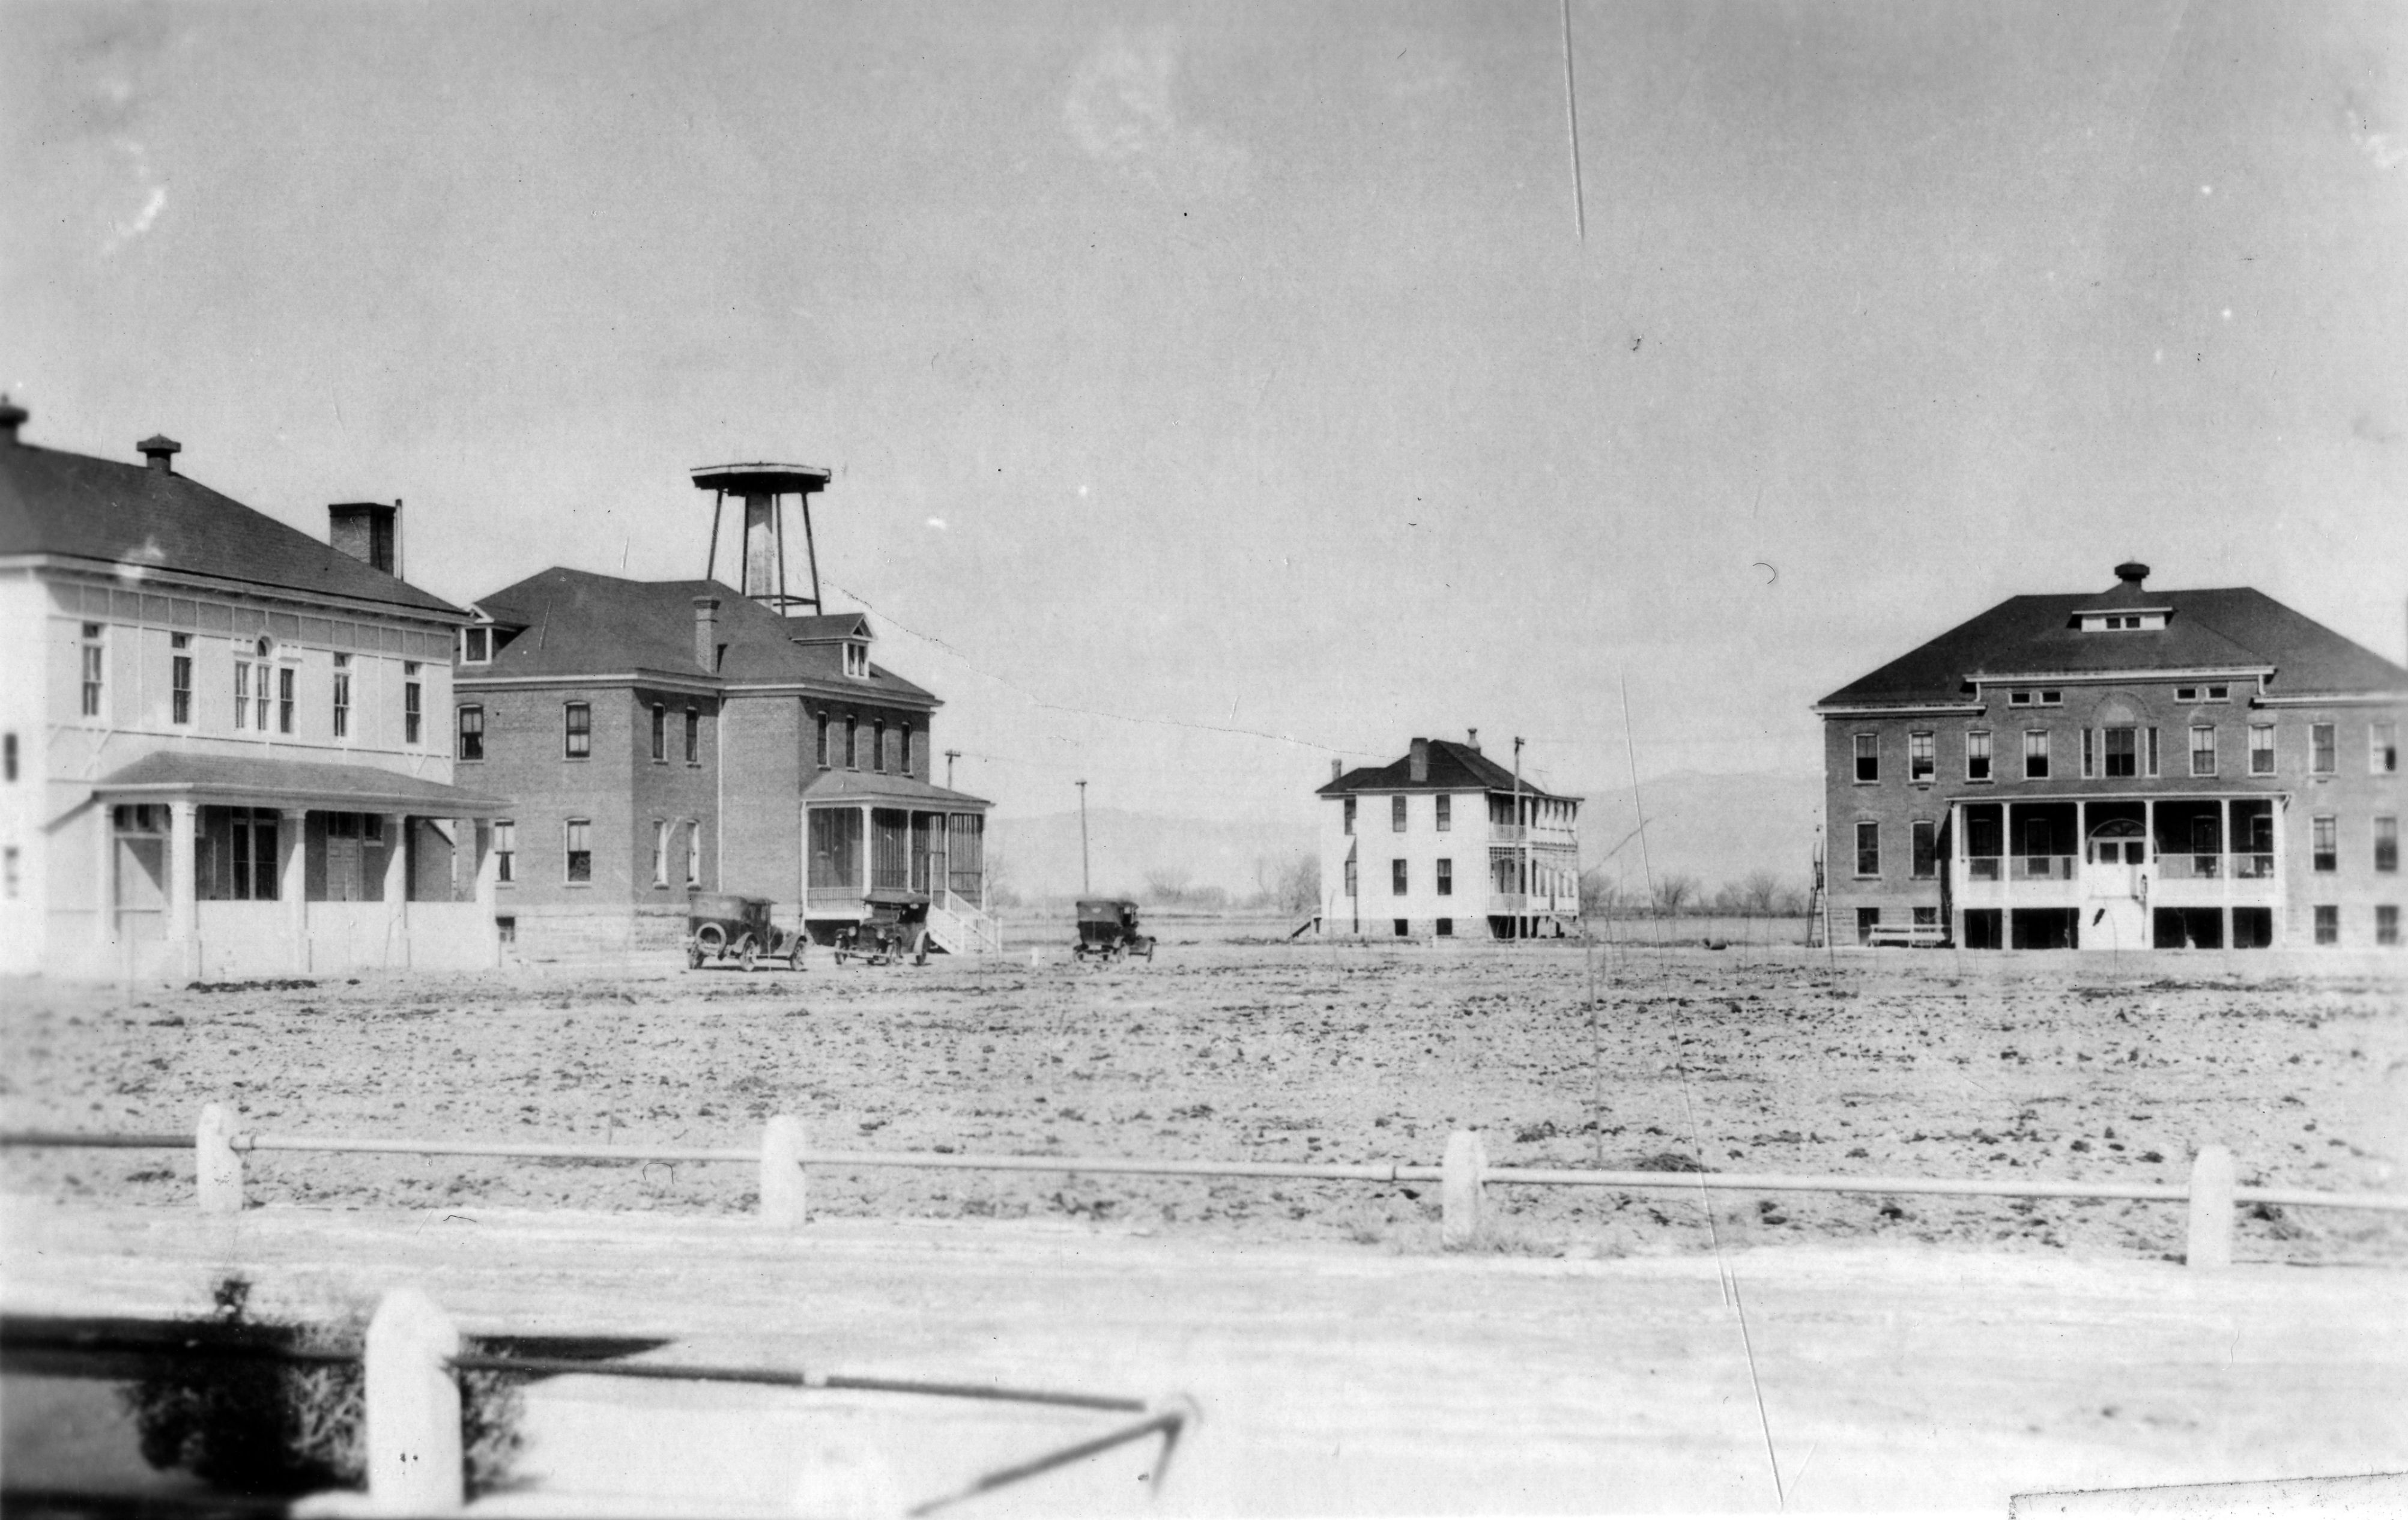 Photo of four buildings sitting on a barren piece of land. in the foreground, part of a dirt road can be seen. There are 3 vehicles parked in front of two of the buildings on the left side of the image. In the far distance, the hazy silouette of mountains can be seen. There are no people immediately visible in this historic photograph.